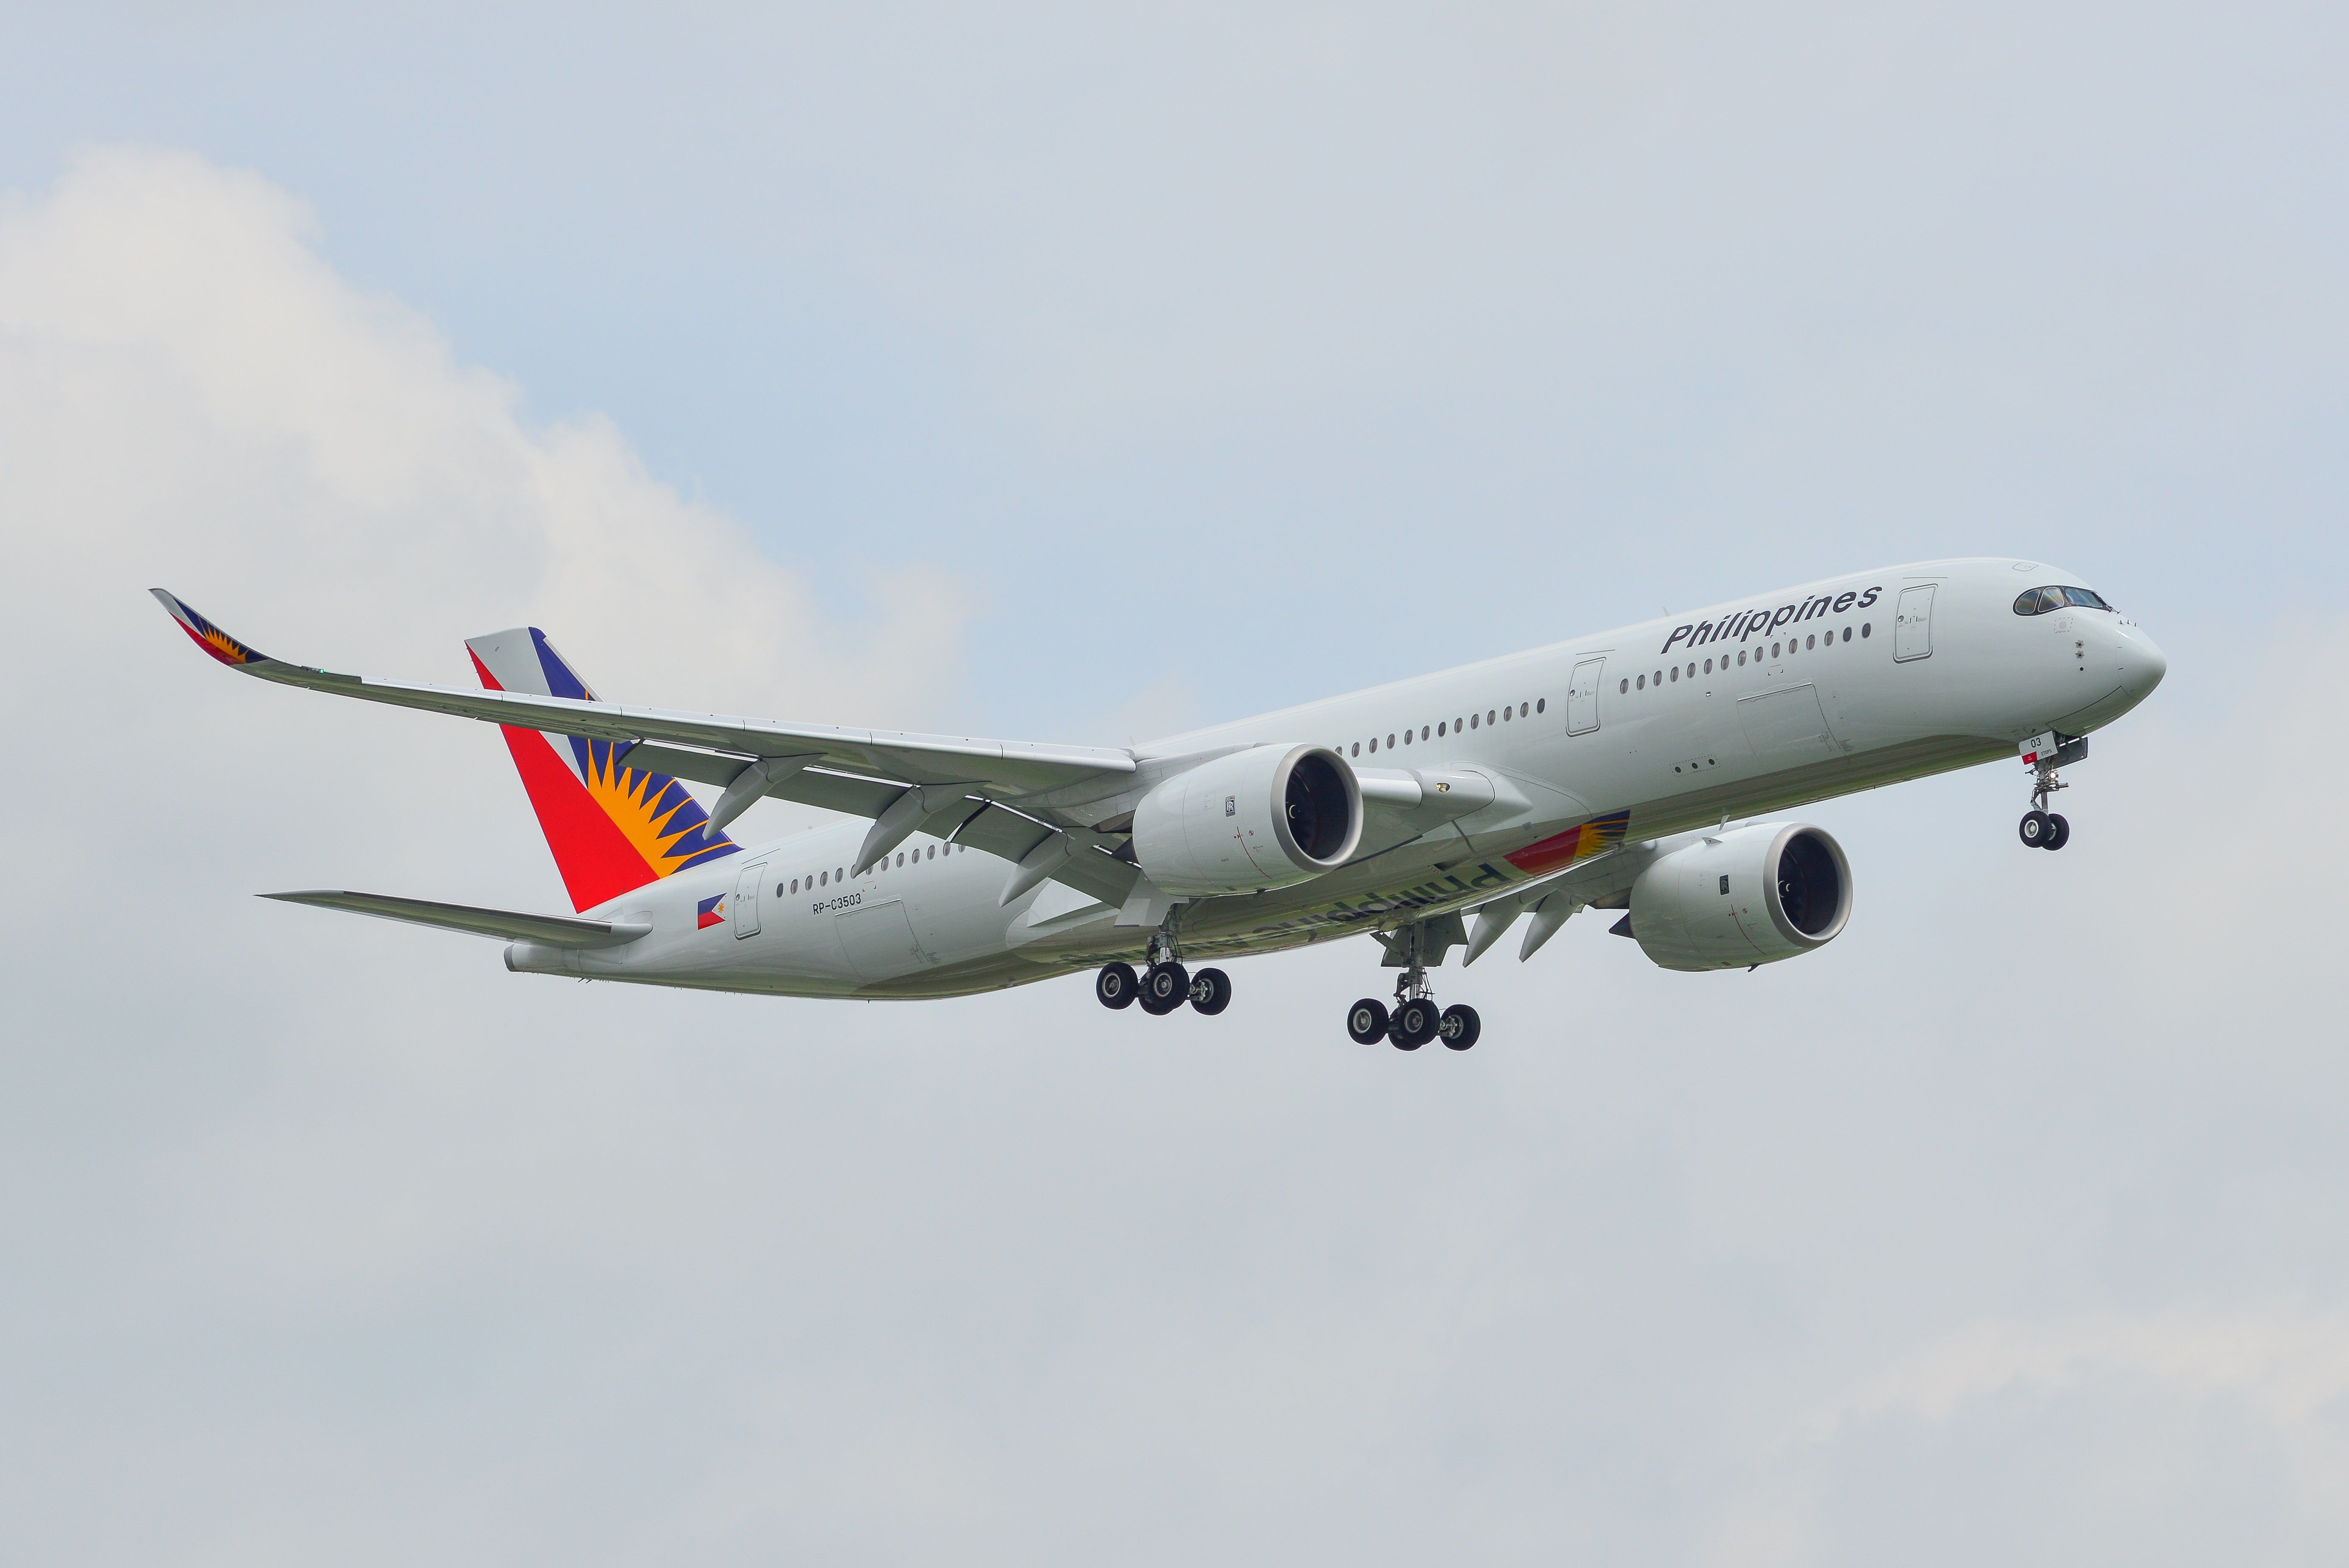 Philippine Airlines A350 landing